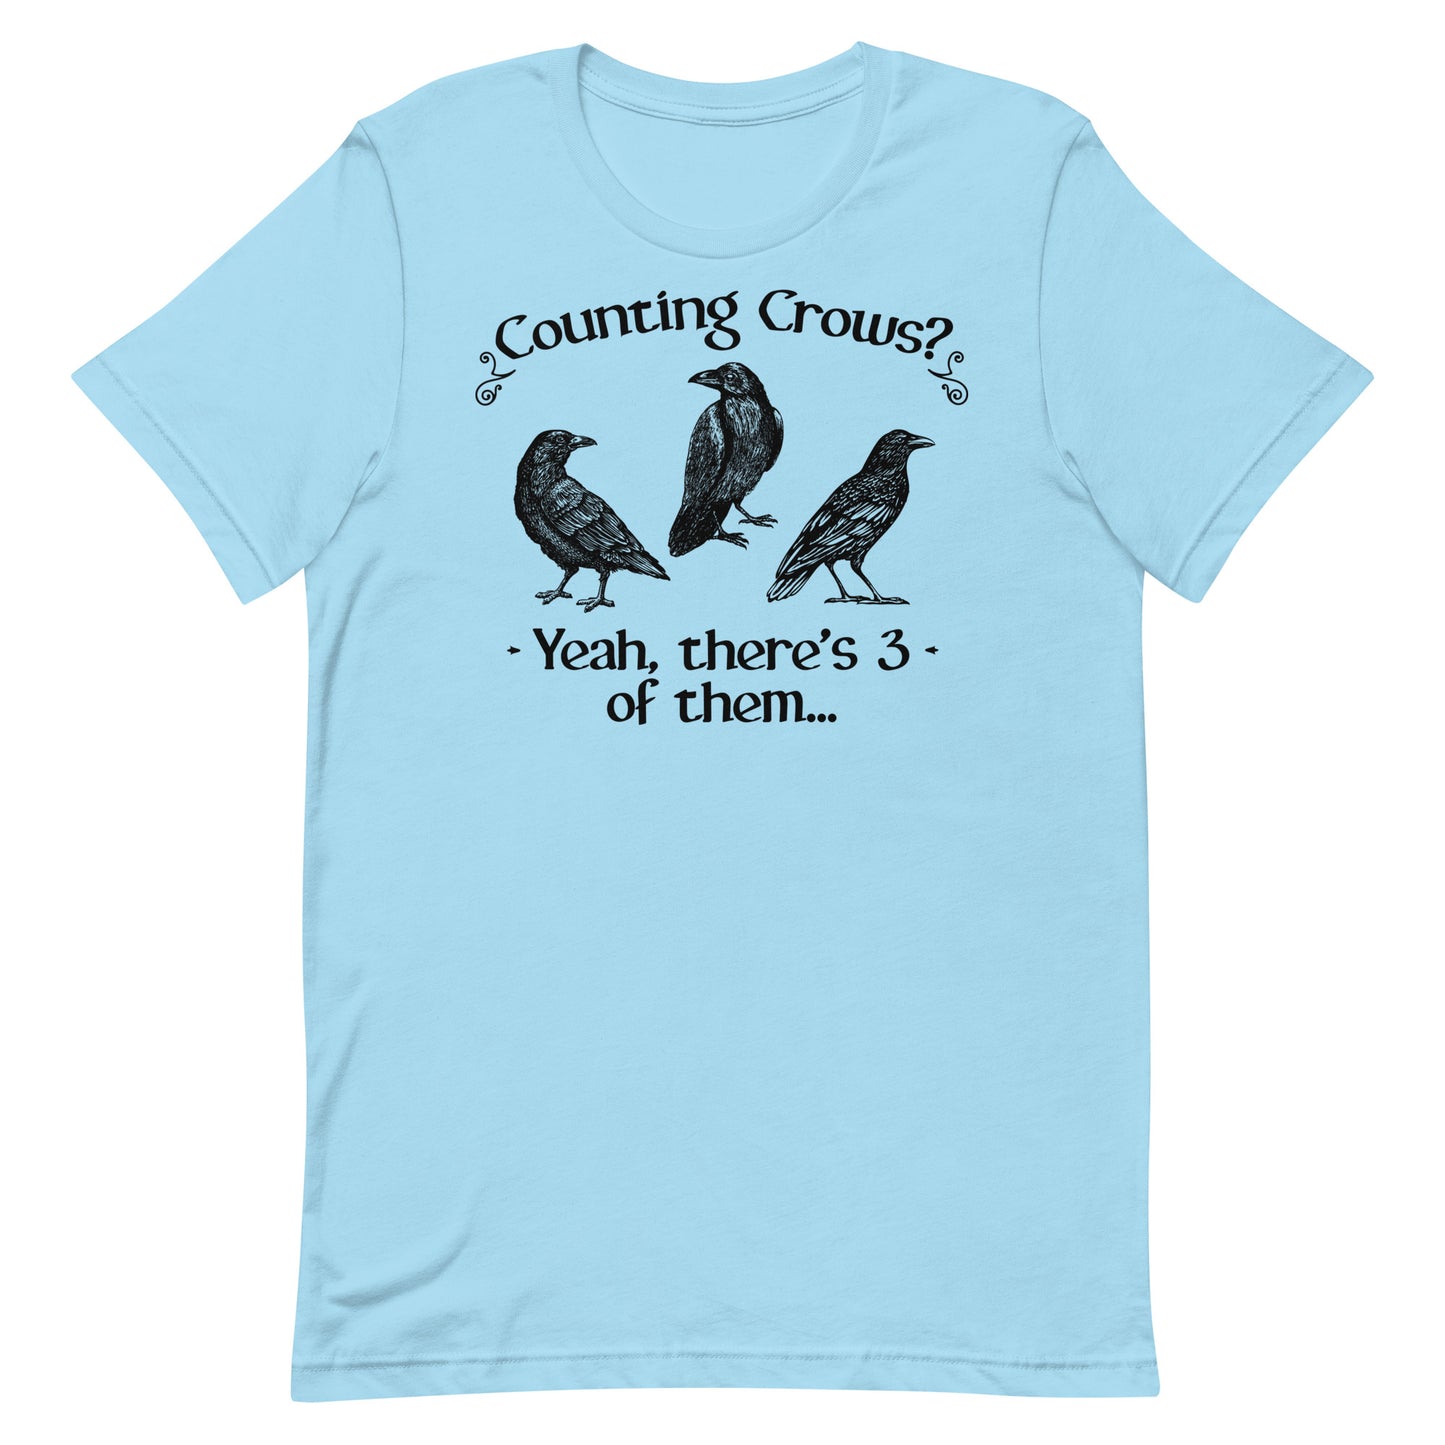 Counting Crows? There's 3 of Them Unisex t-shirt